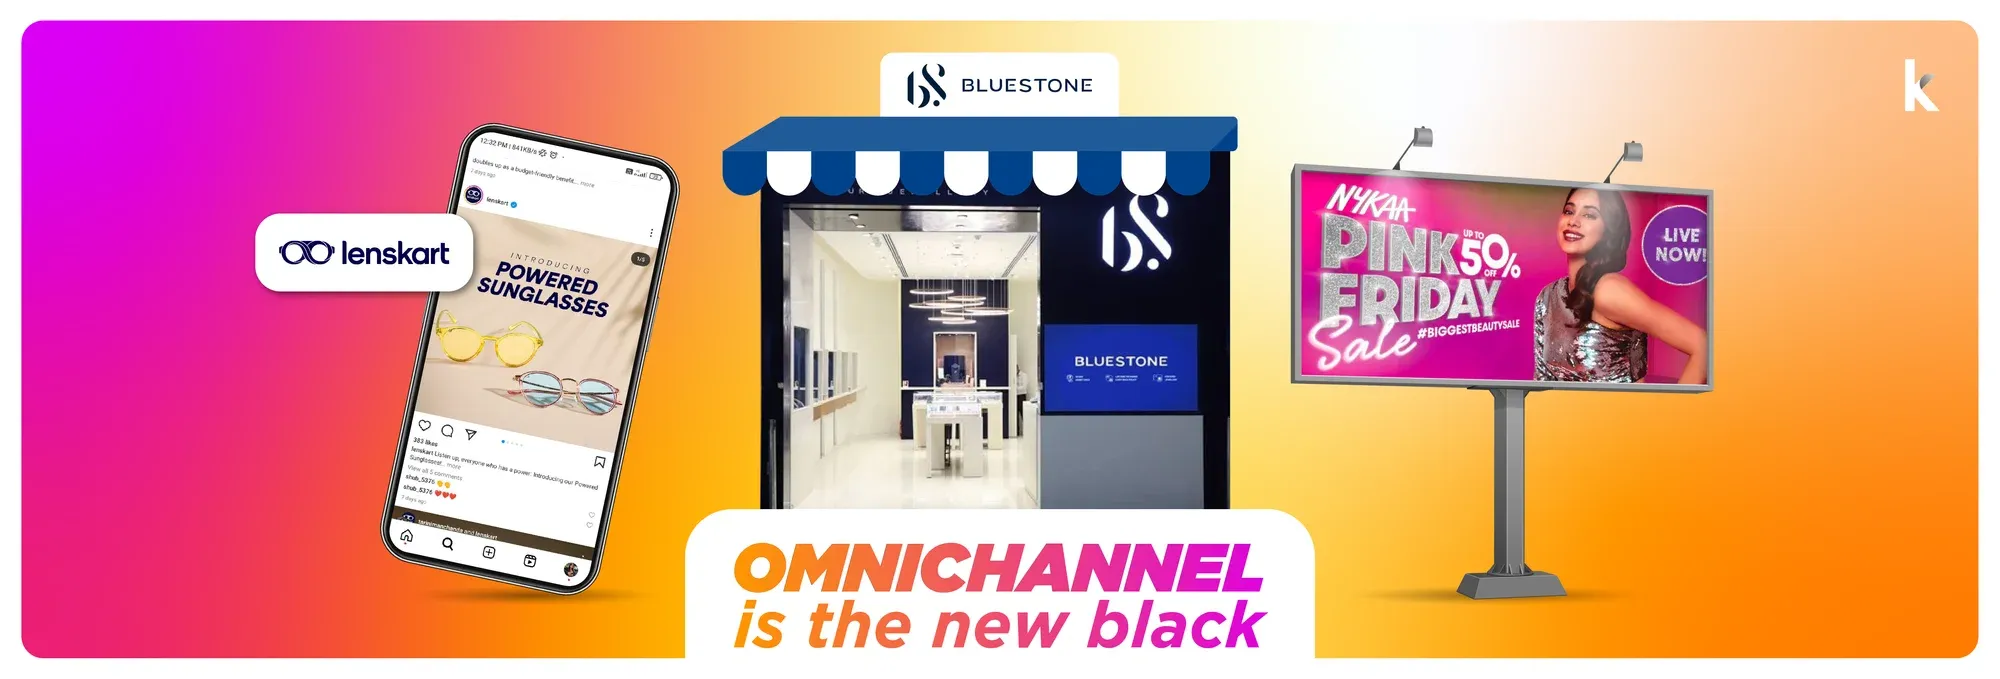 The omnichannel path: why are D2C brands making the move?